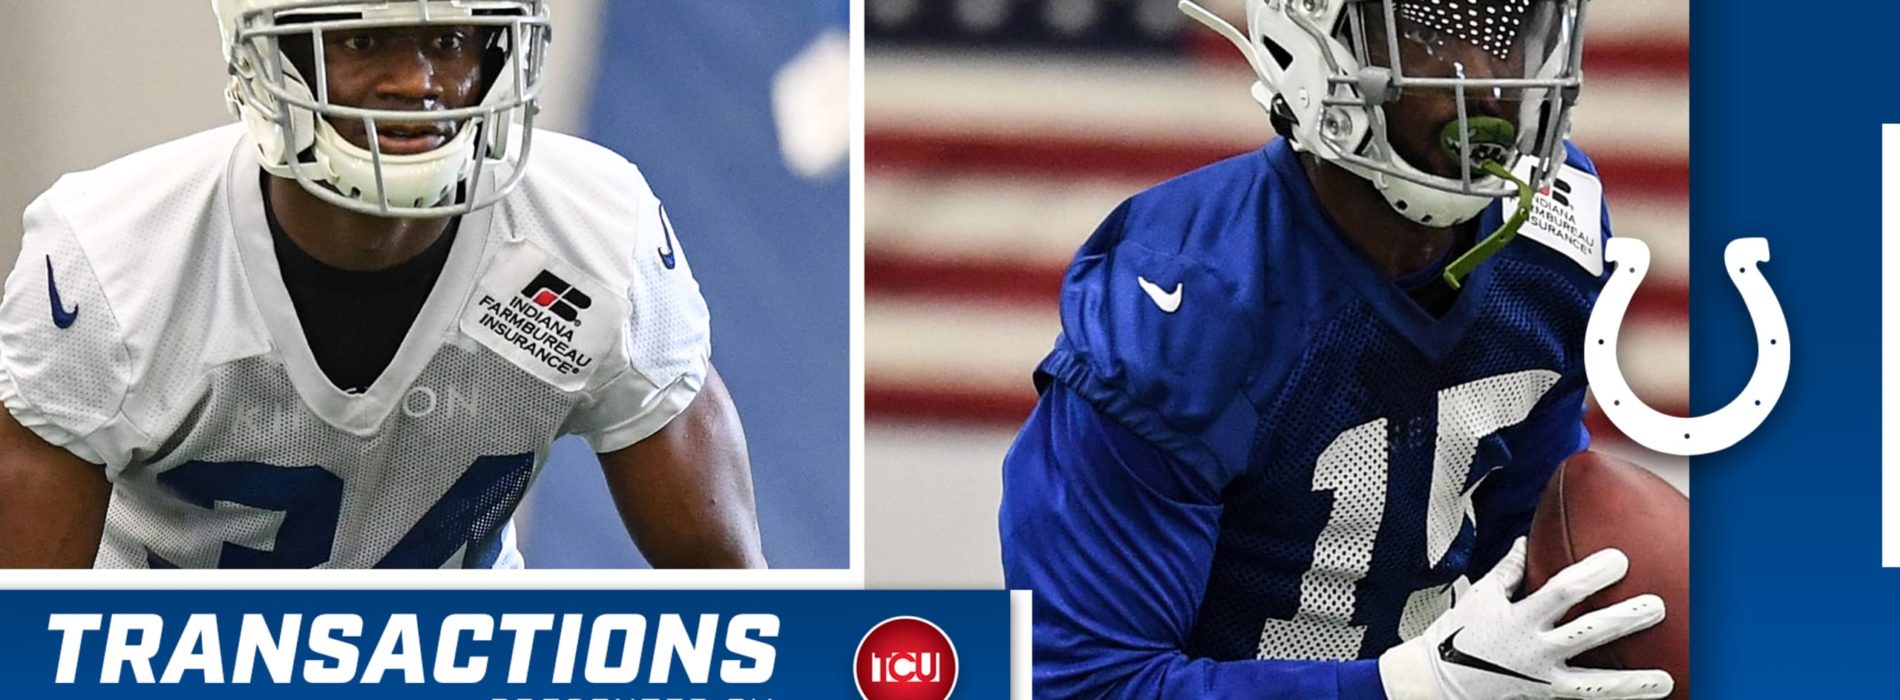 2019 Colts Draft Picks Rock Ya-Sin, Parris Campbell Sign Contracts